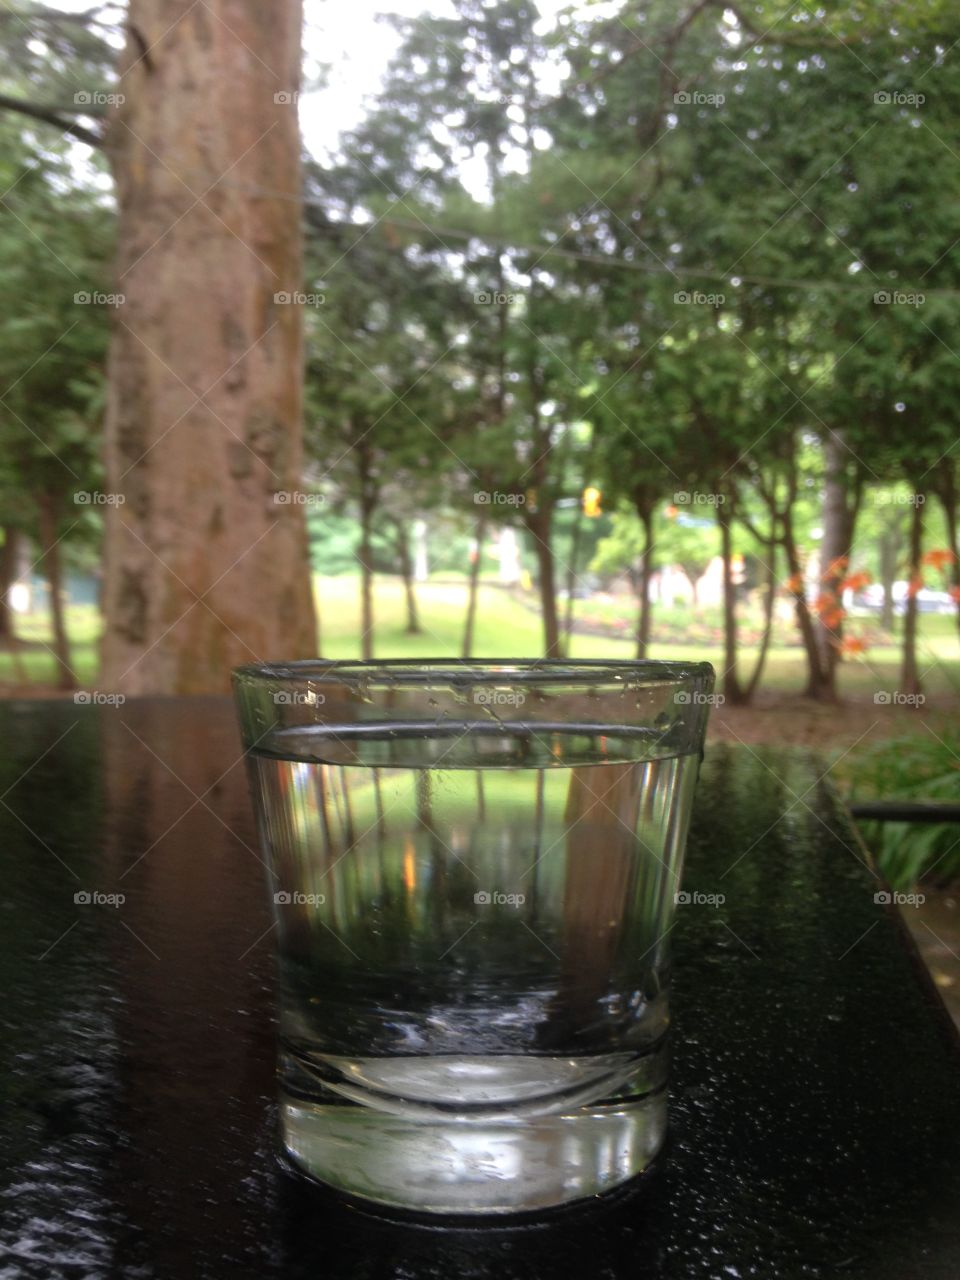 Cup on a table in the rain